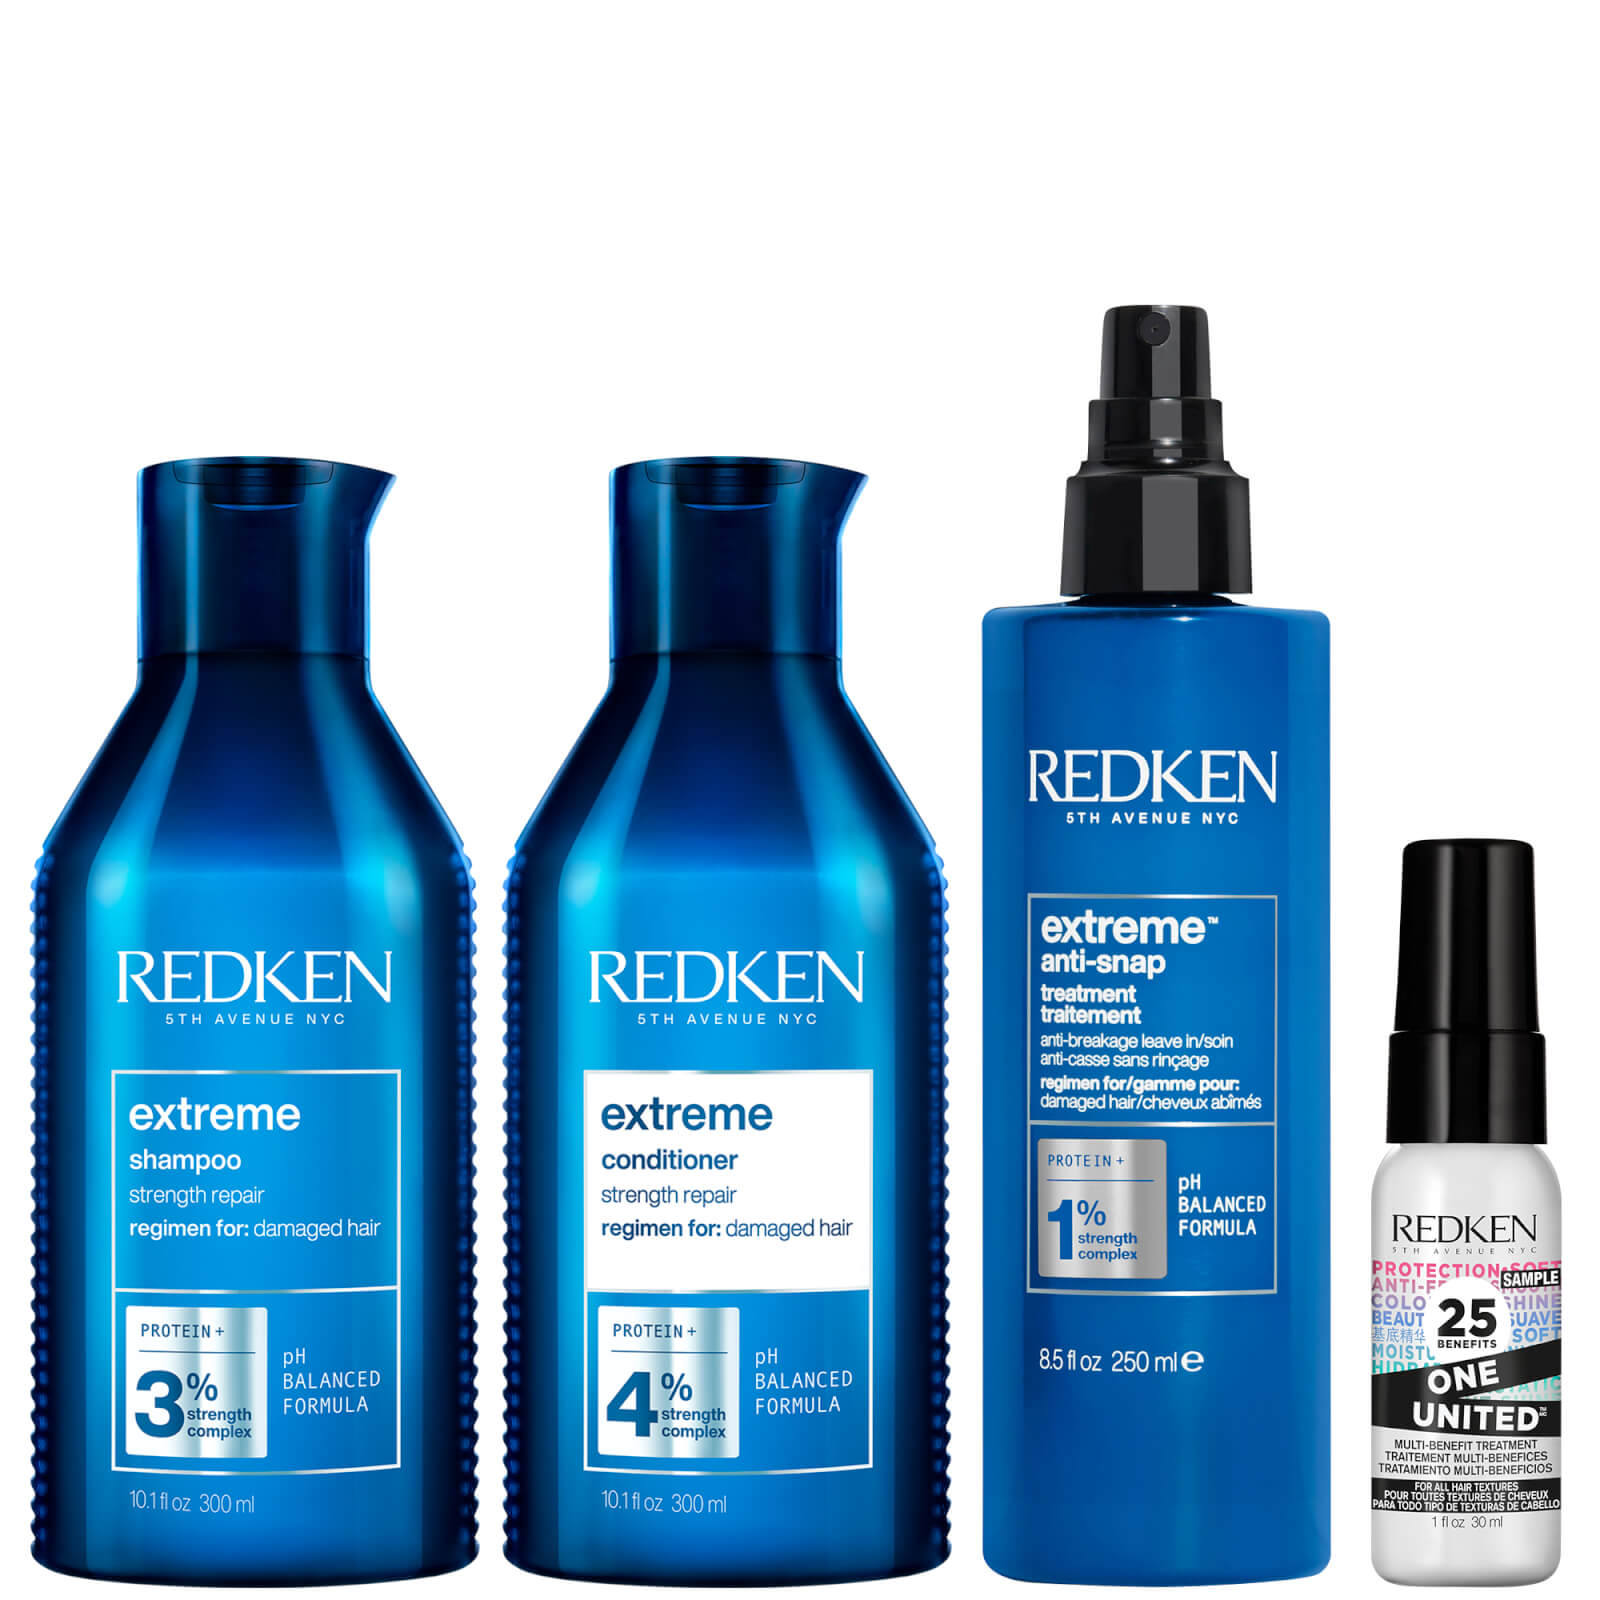 Redken Extreme Shampoo 300ml, Conditioner 300ml, Anti Snap 250ml and One United 30ml Routine Bundle 